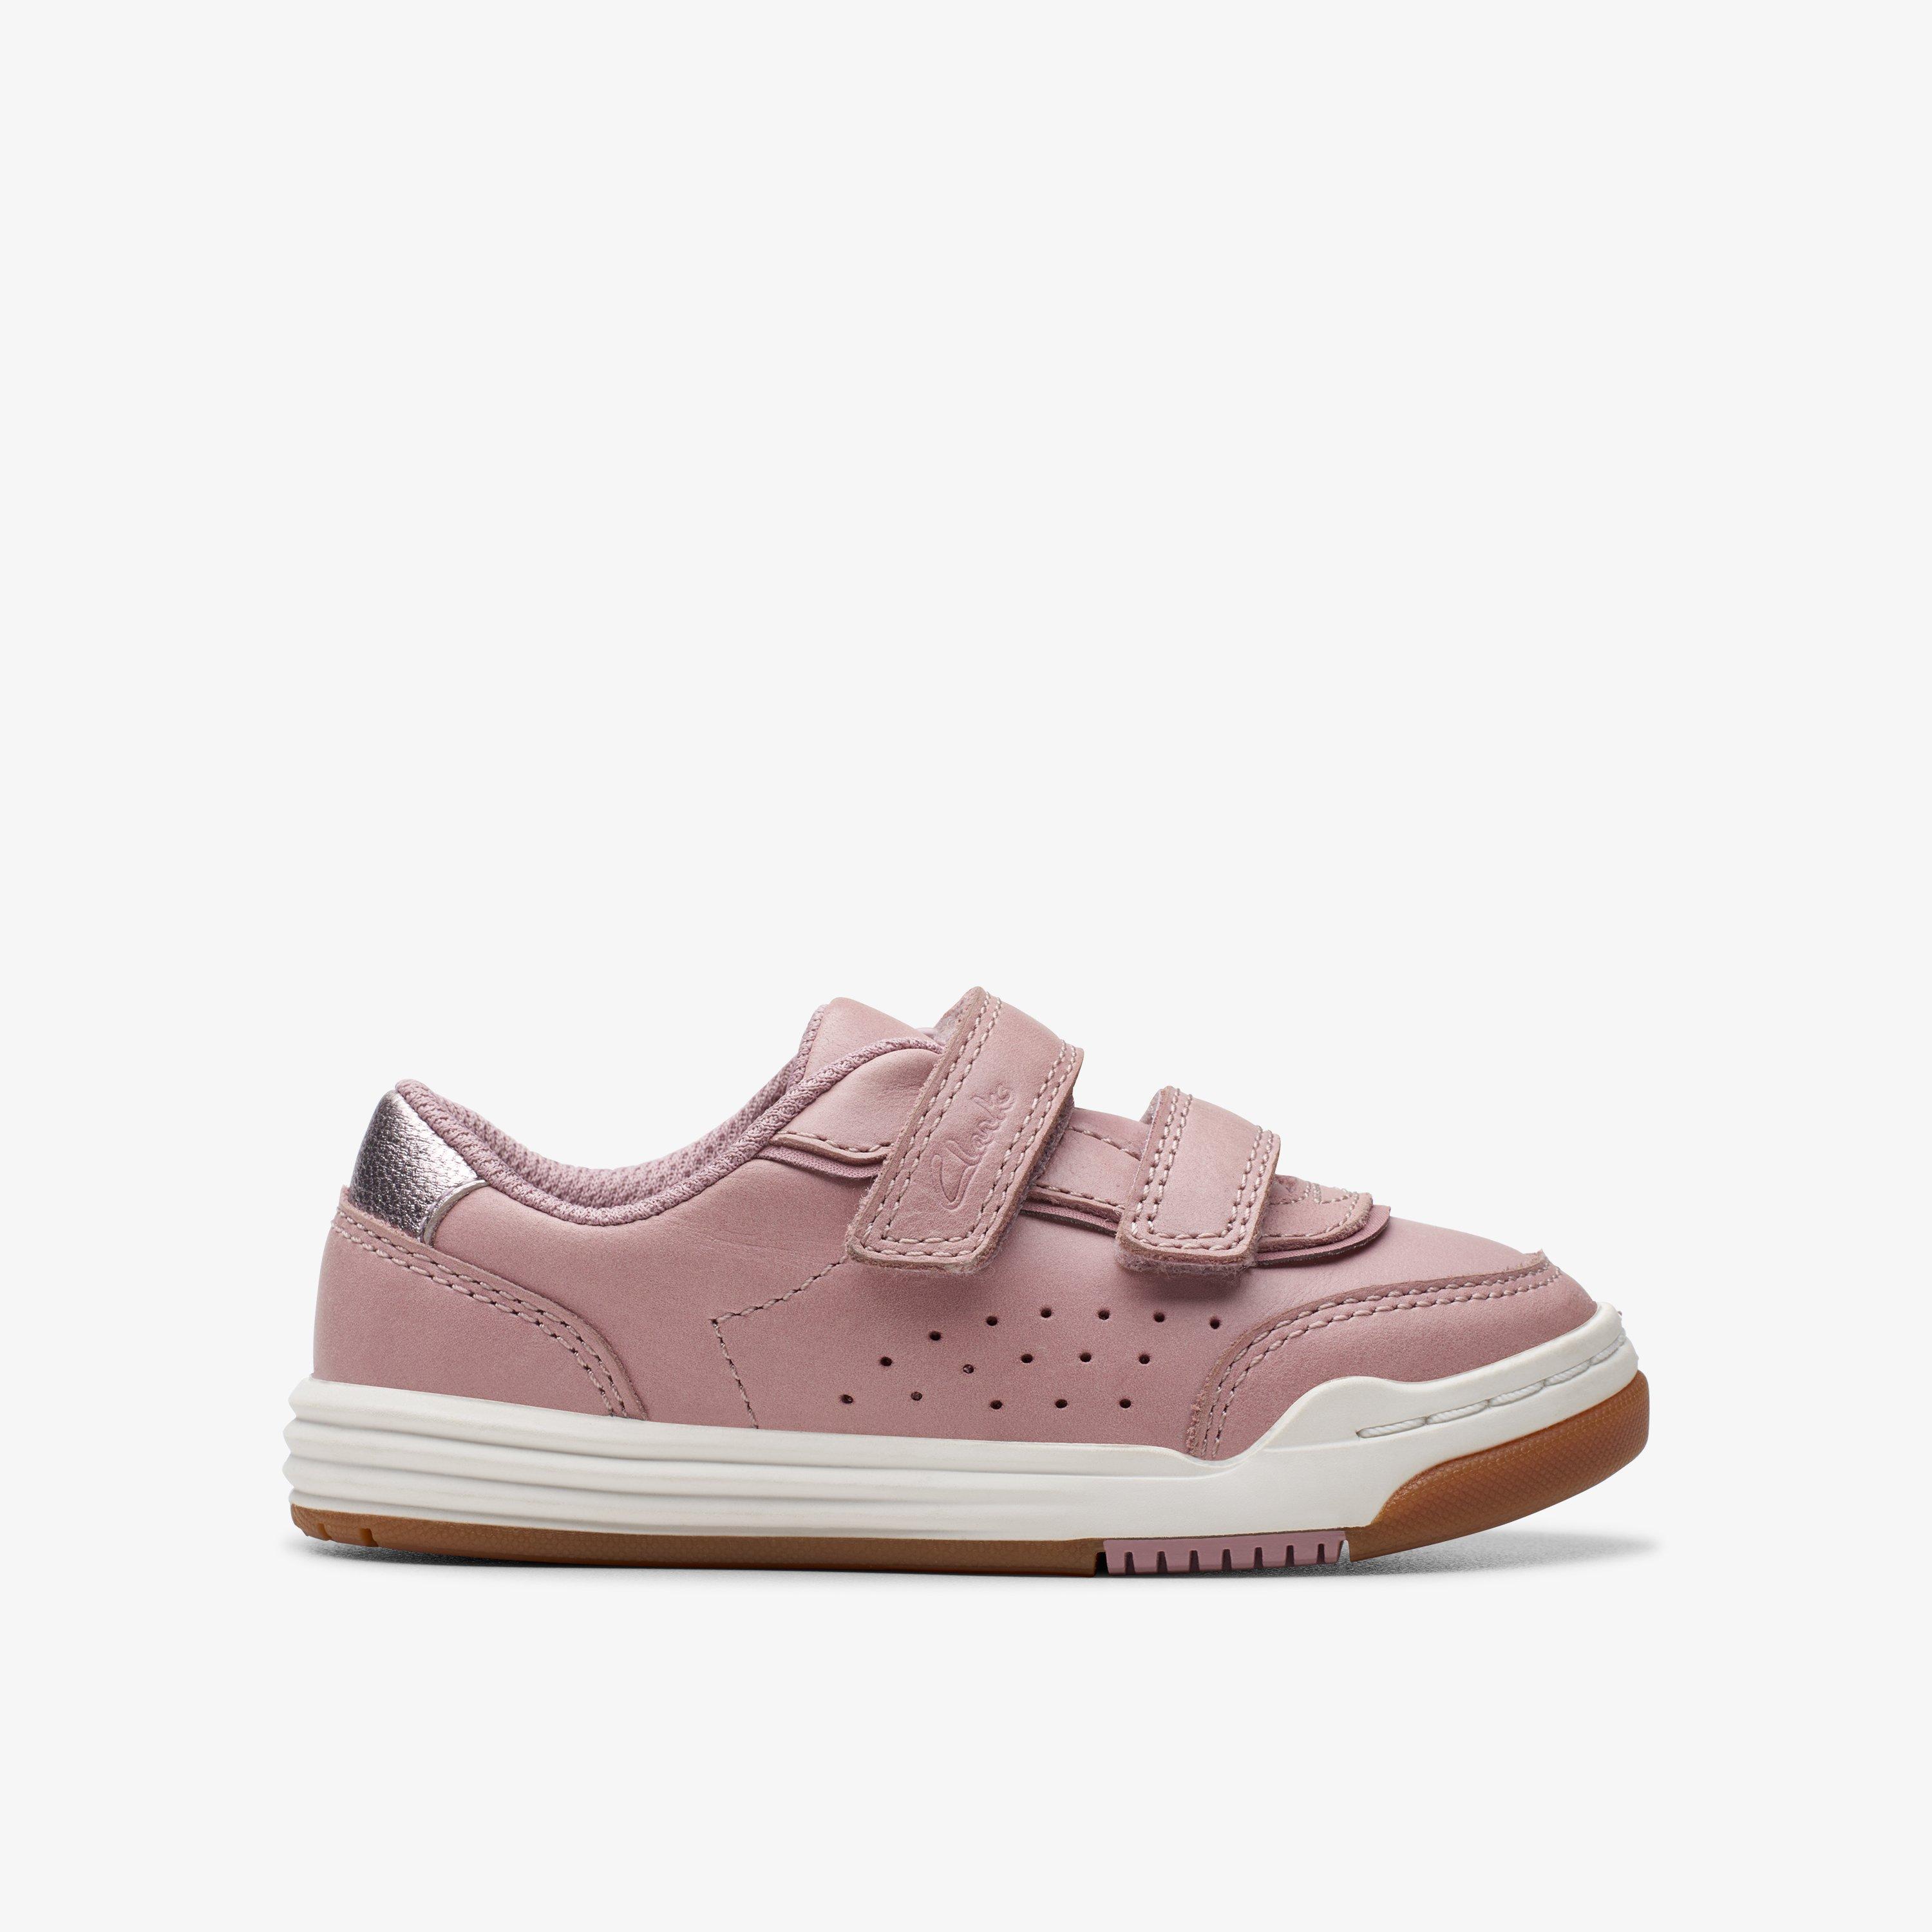 Girls Urban Solo Toddler Dusty Pink Trainers | Clarks UK